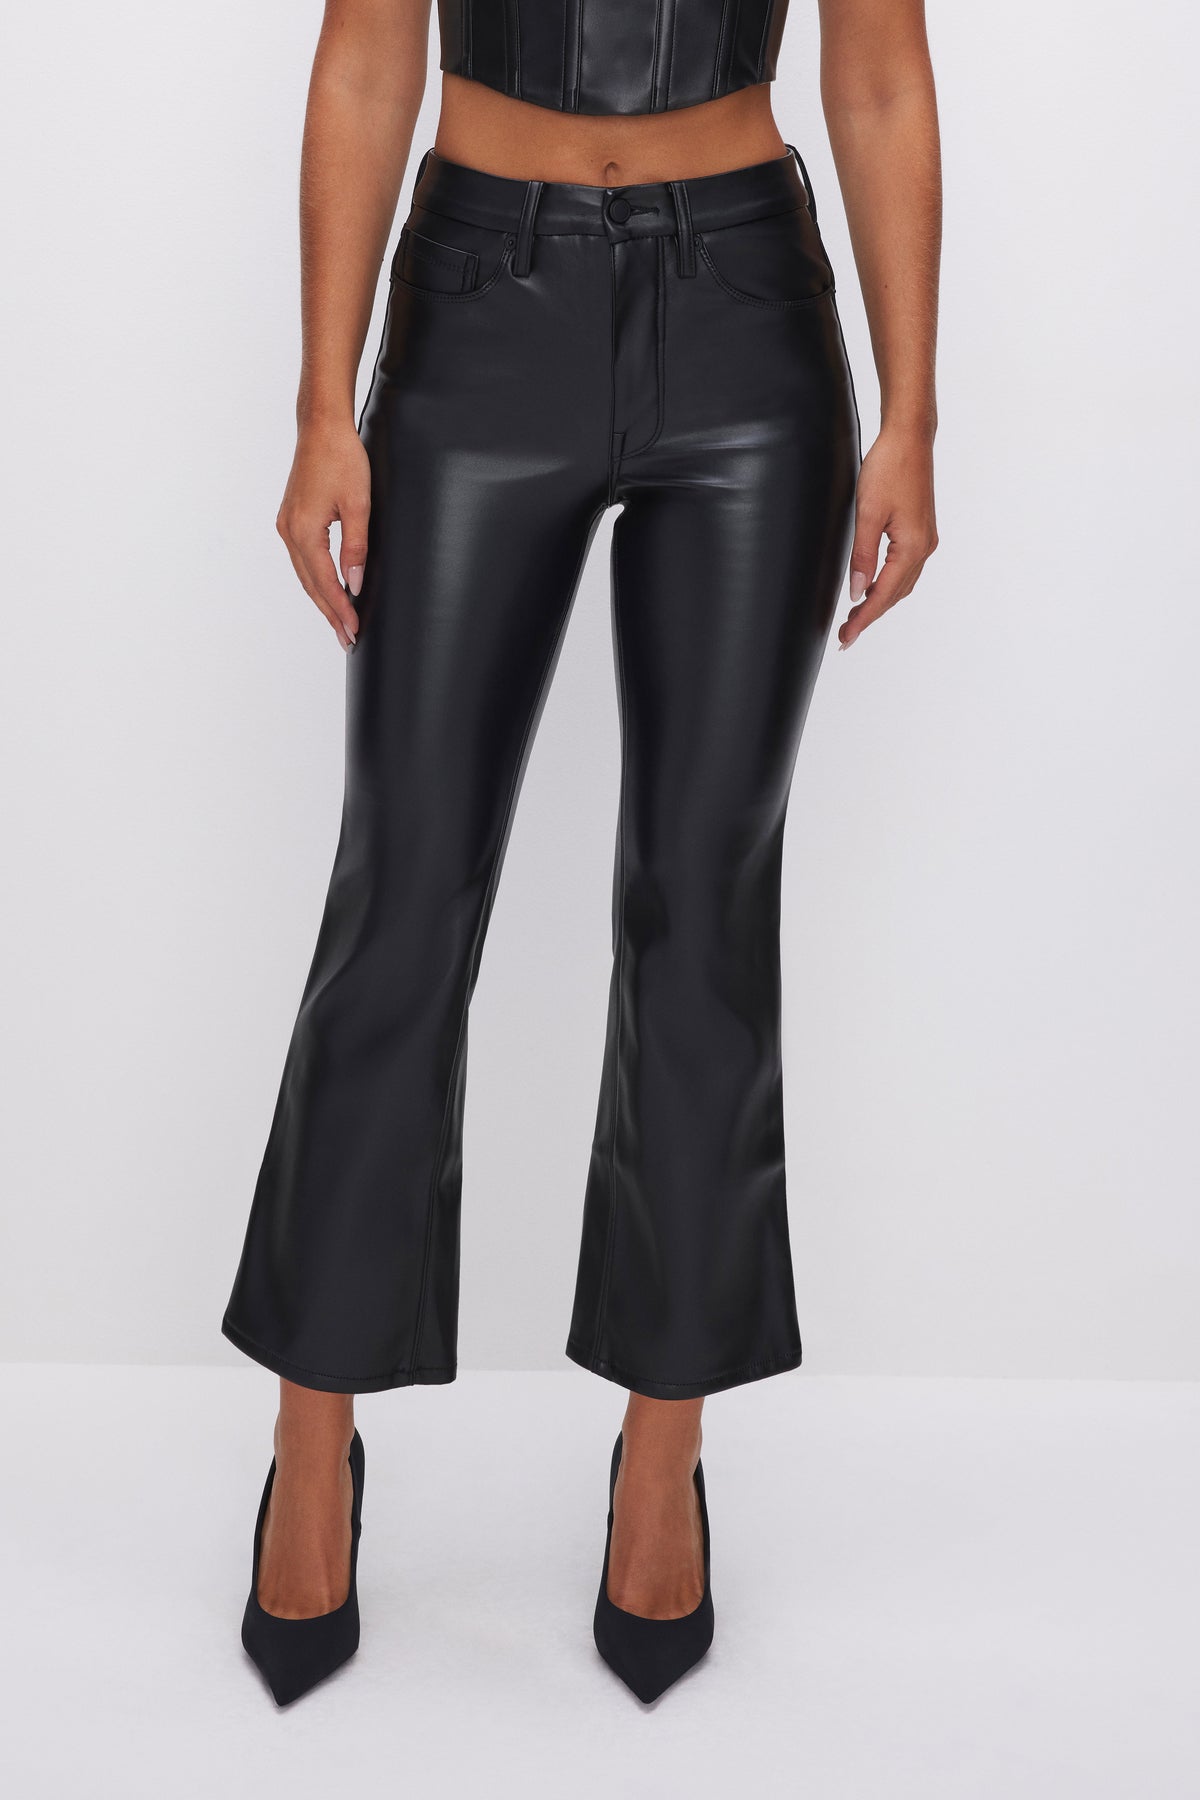 GOOD LEGS CROPPED MINI BOOT FAUX LEATHER PANTS | BLACK001 - GOOD AMERICAN